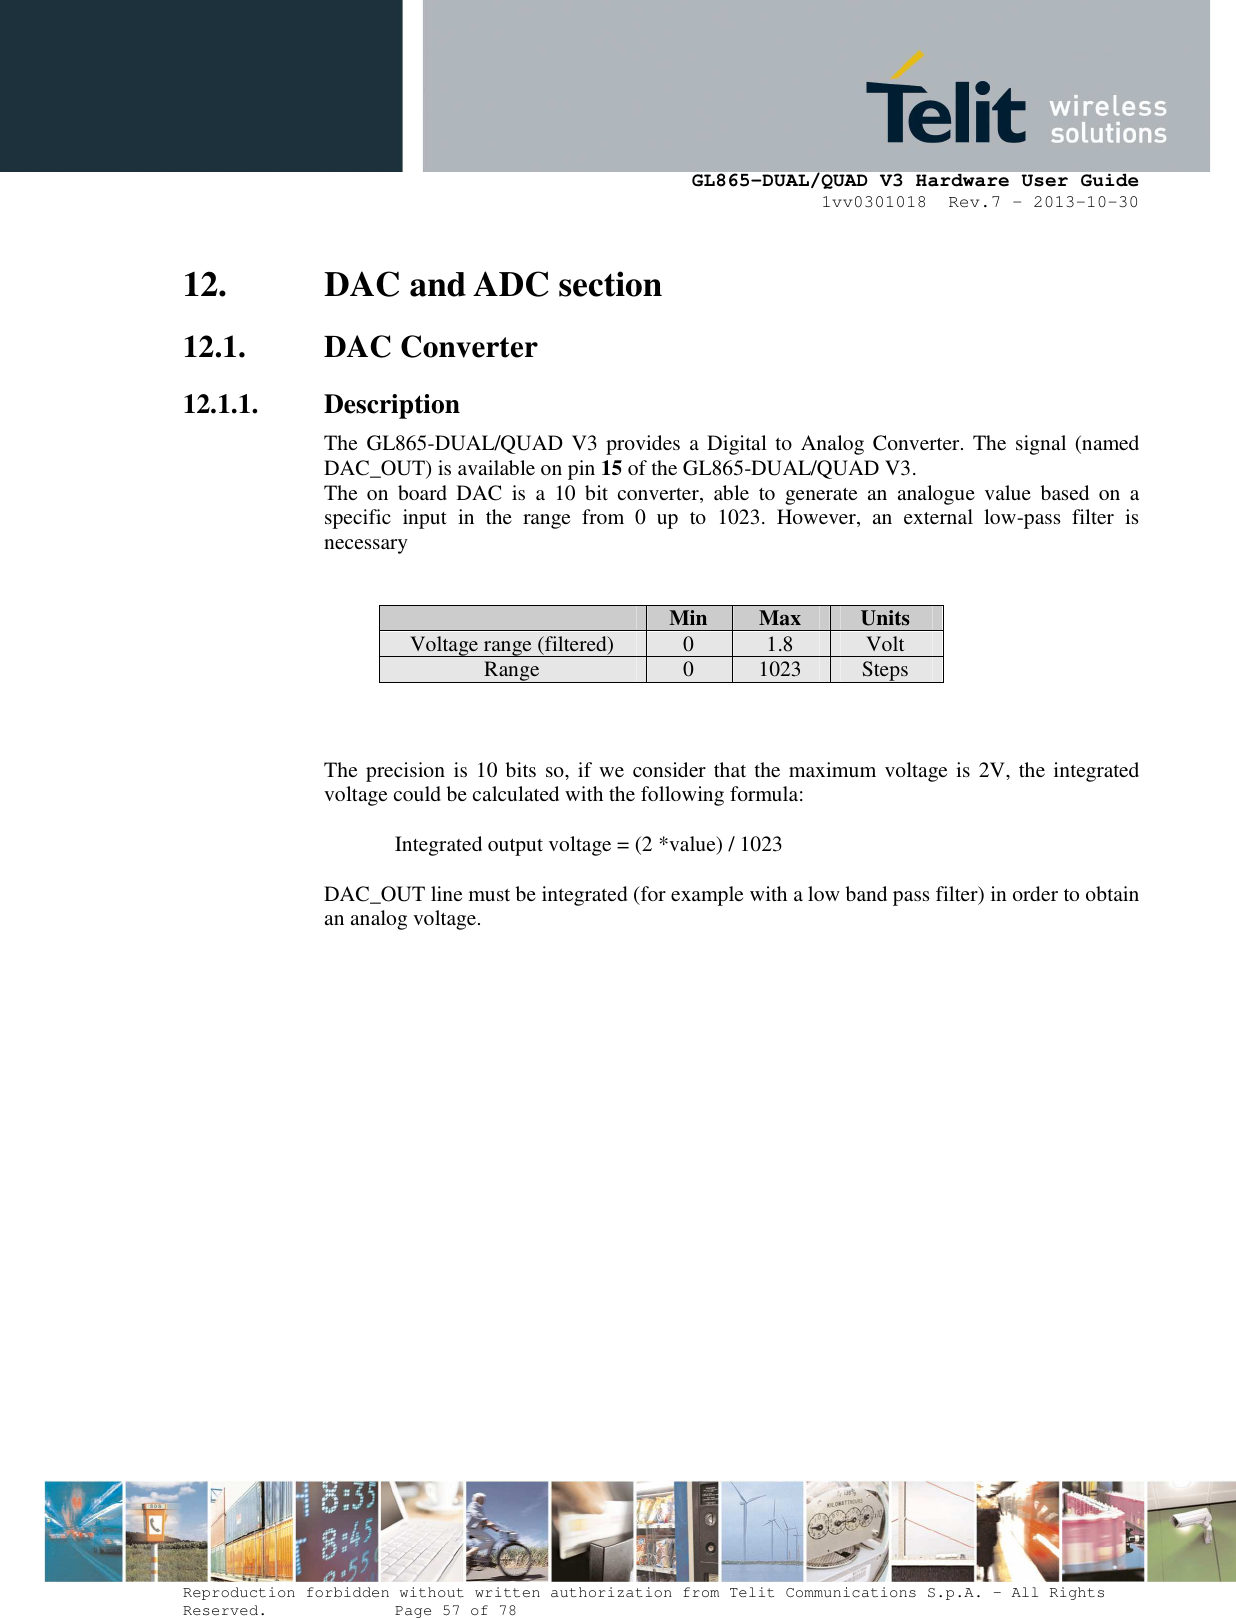      GL865-DUAL/QUAD V3 Hardware User Guide 1vv0301018  Rev.7 – 2013-10-30  Reproduction forbidden without written authorization from Telit Communications S.p.A. - All Rights Reserved.    Page 57 of 78 Mod. 0805 2011-07 Rev.2 12. DAC and ADC section 12.1. DAC Converter 12.1.1. Description The GL865-DUAL/QUAD V3 provides a Digital to Analog Converter. The signal (named DAC_OUT) is available on pin 15 of the GL865-DUAL/QUAD V3. The  on  board  DAC  is  a  10  bit  converter,  able  to  generate  an  analogue  value  based  on  a specific  input  in  the  range  from  0  up  to  1023.  However,  an  external  low-pass  filter  is necessary    Min  Max  Units Voltage range (filtered) 0 1.8 Volt Range  0  1023  Steps    The precision is 10 bits so, if we consider that the maximum voltage is 2V, the integrated voltage could be calculated with the following formula:   Integrated output voltage = (2 *value) / 1023  DAC_OUT line must be integrated (for example with a low band pass filter) in order to obtain an analog voltage. 